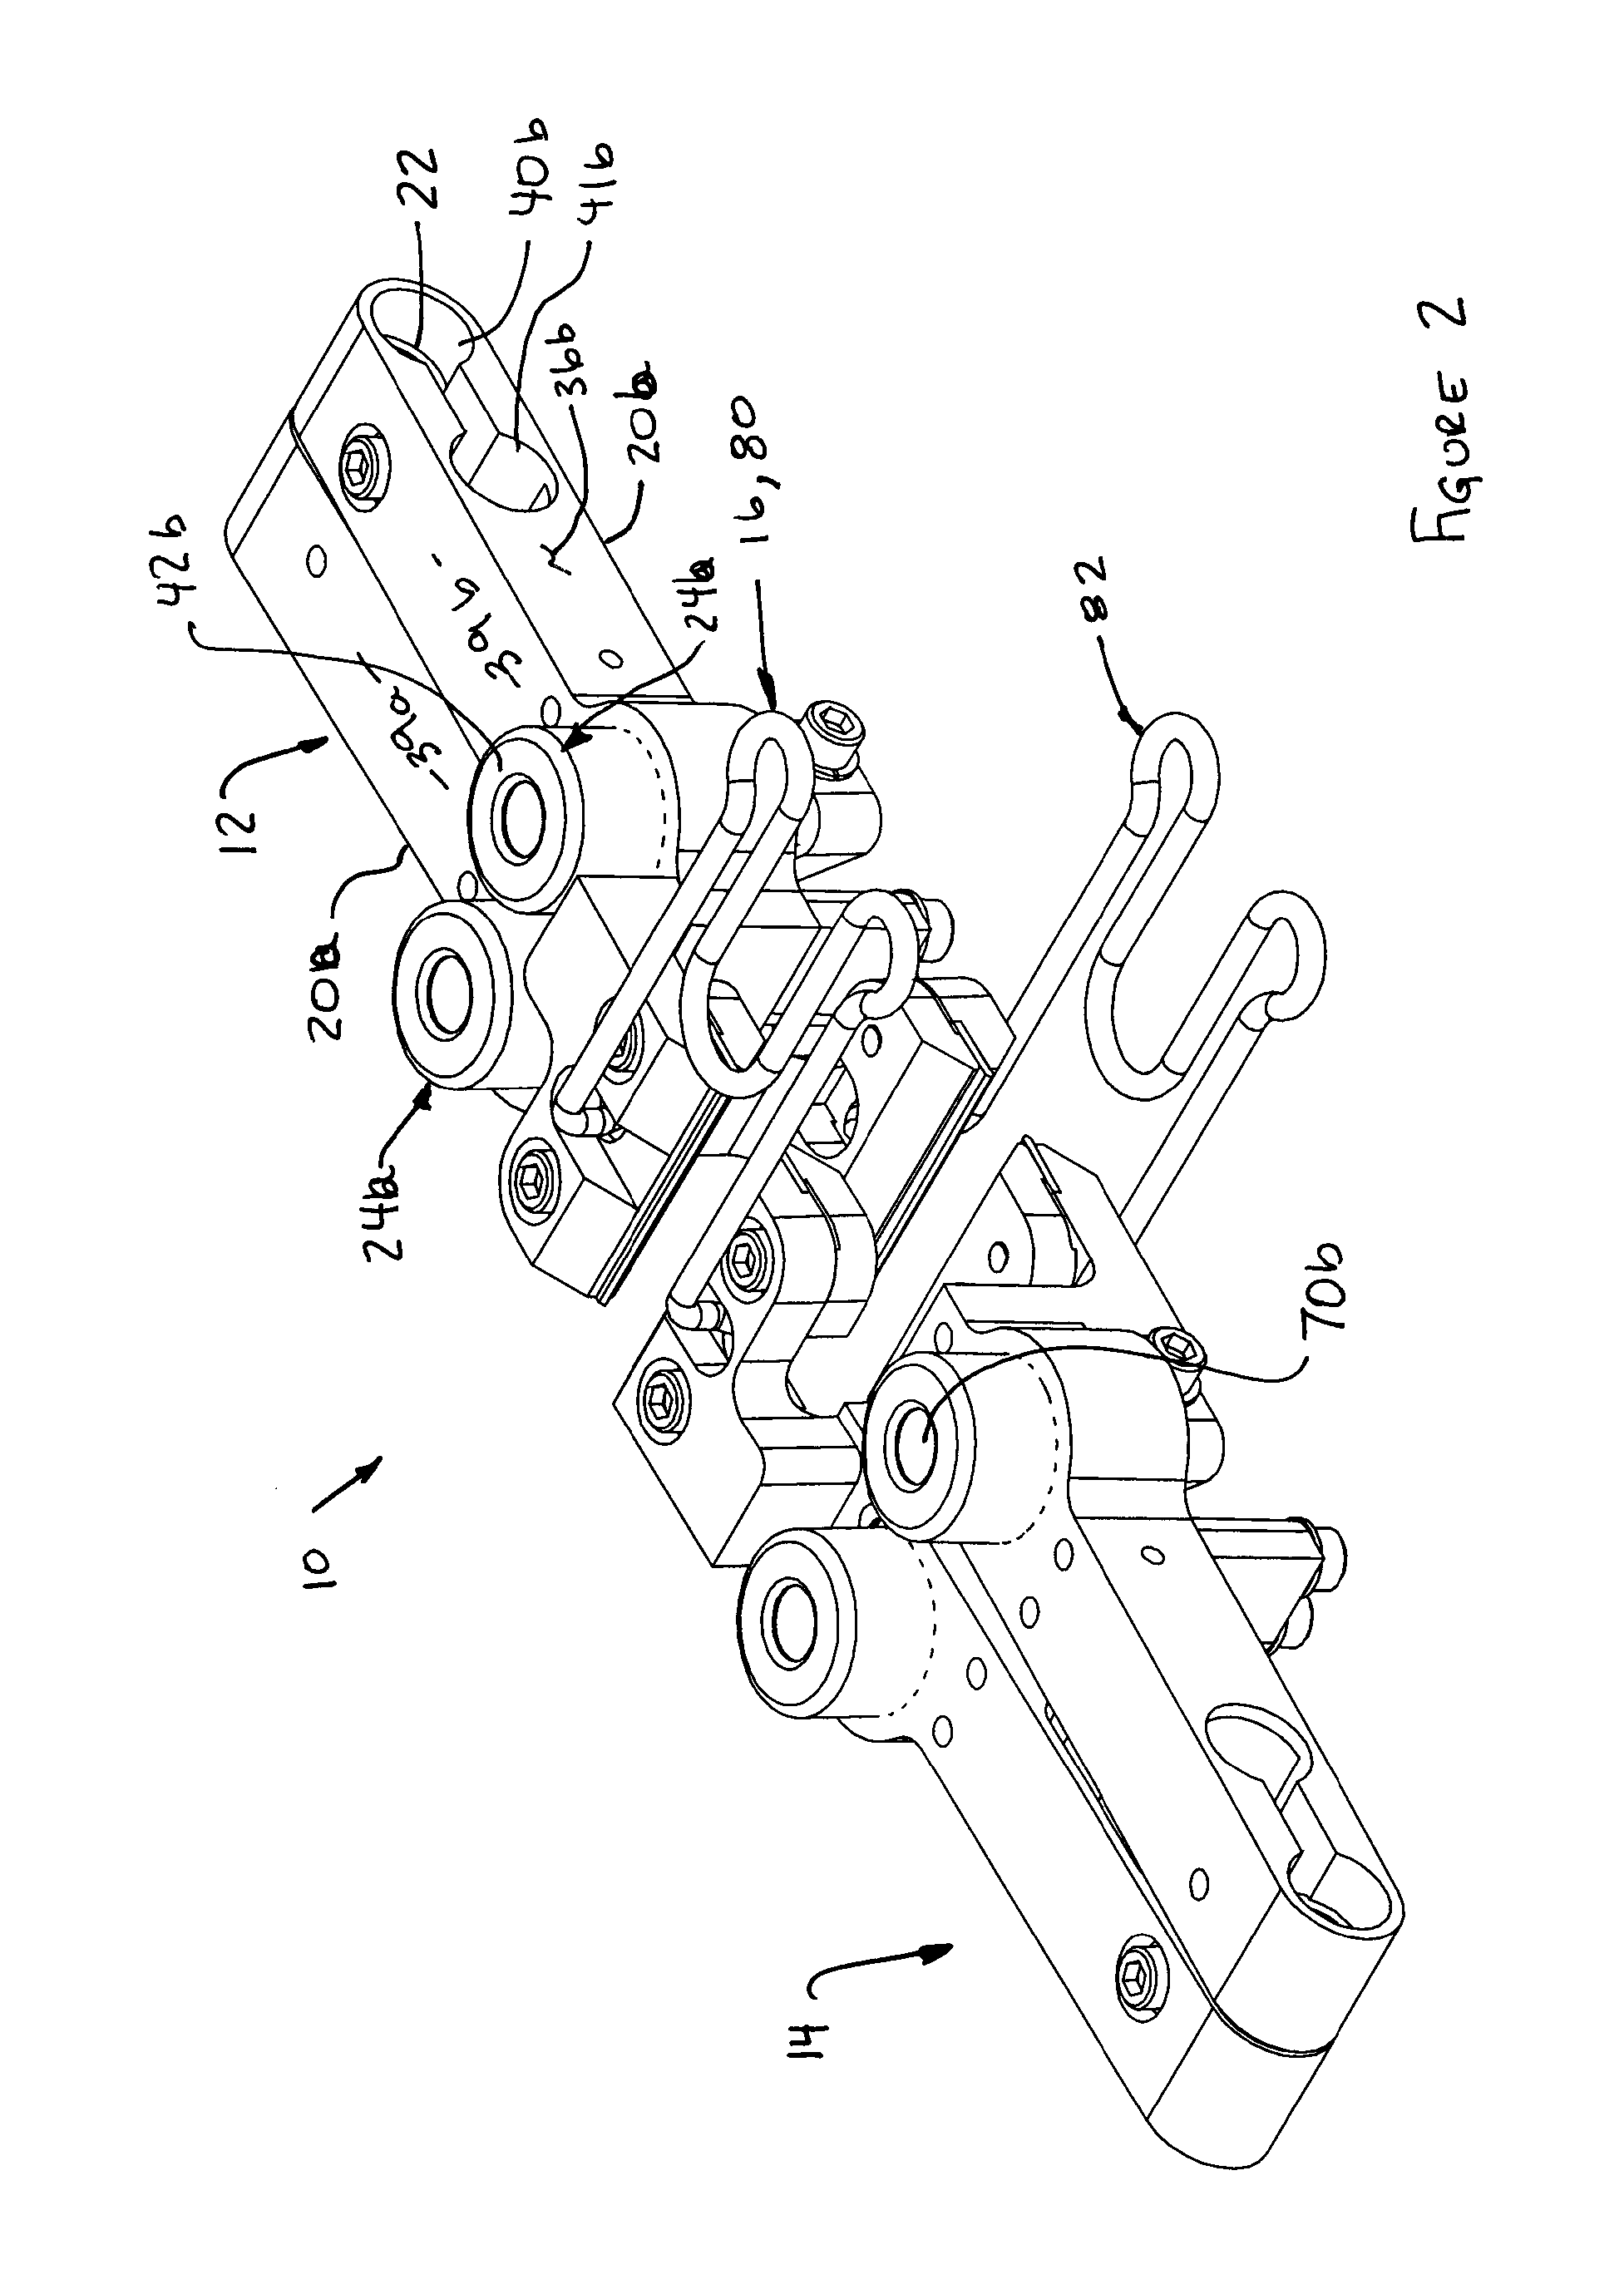 Extensometer assembly for use in material testing systems